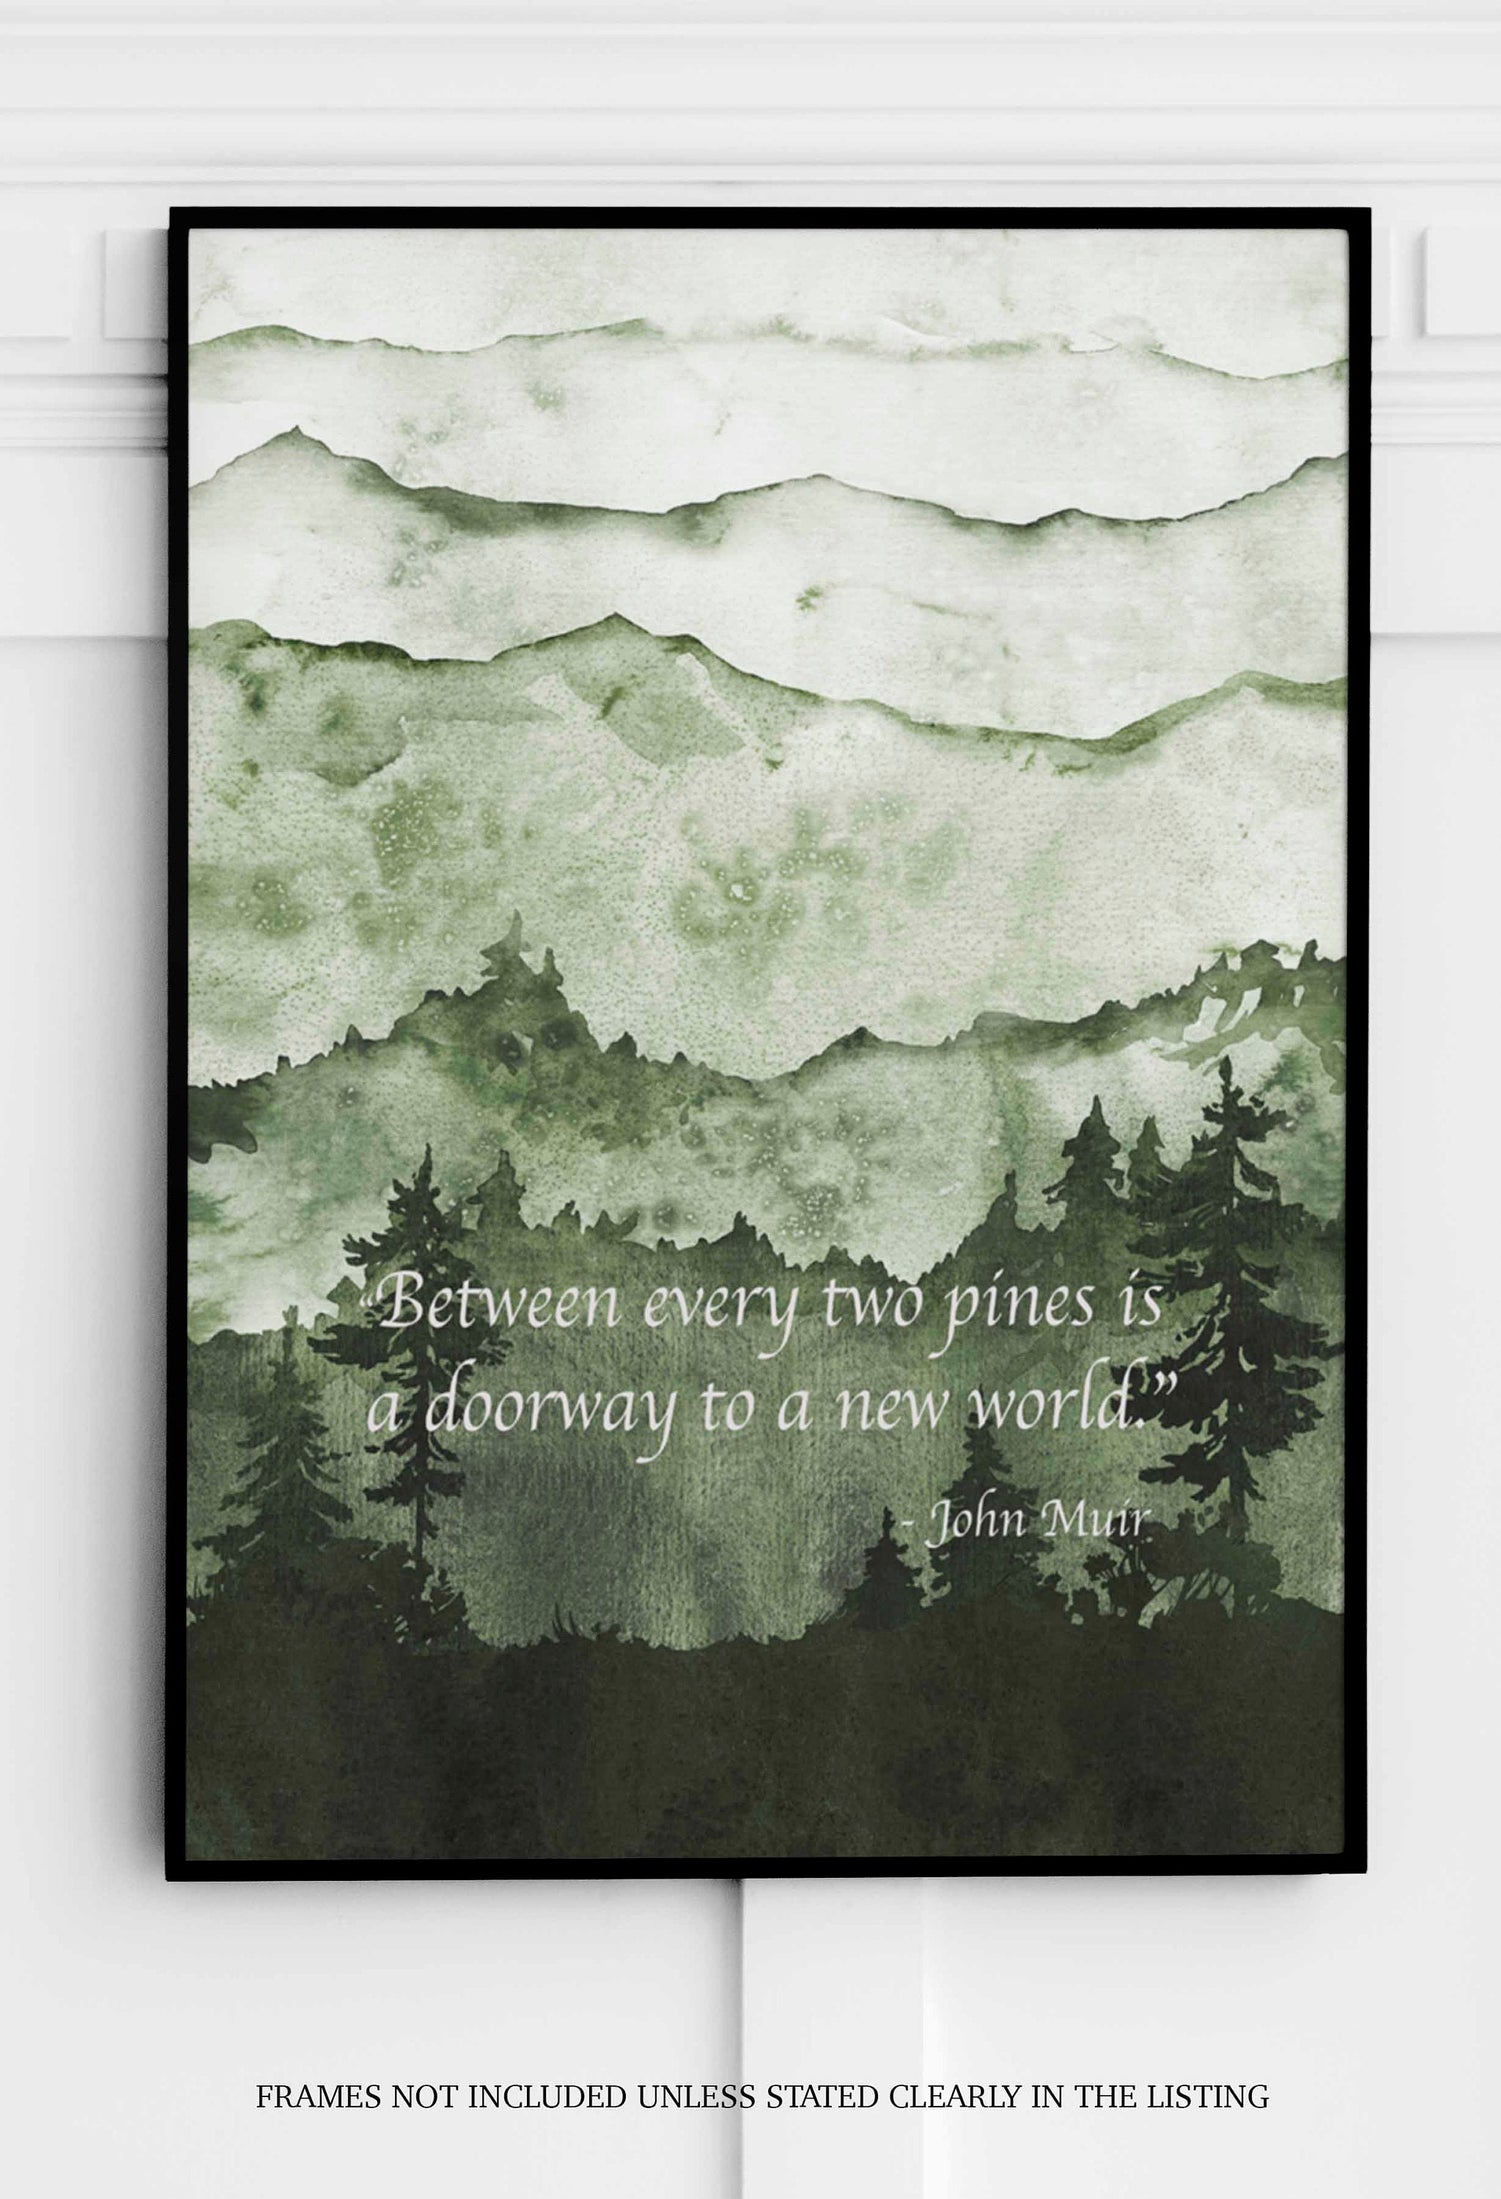 John Muir Print for Country Decor, “Between every two pines is a doorway to a new world.” Nature Quote Wall Art Prints